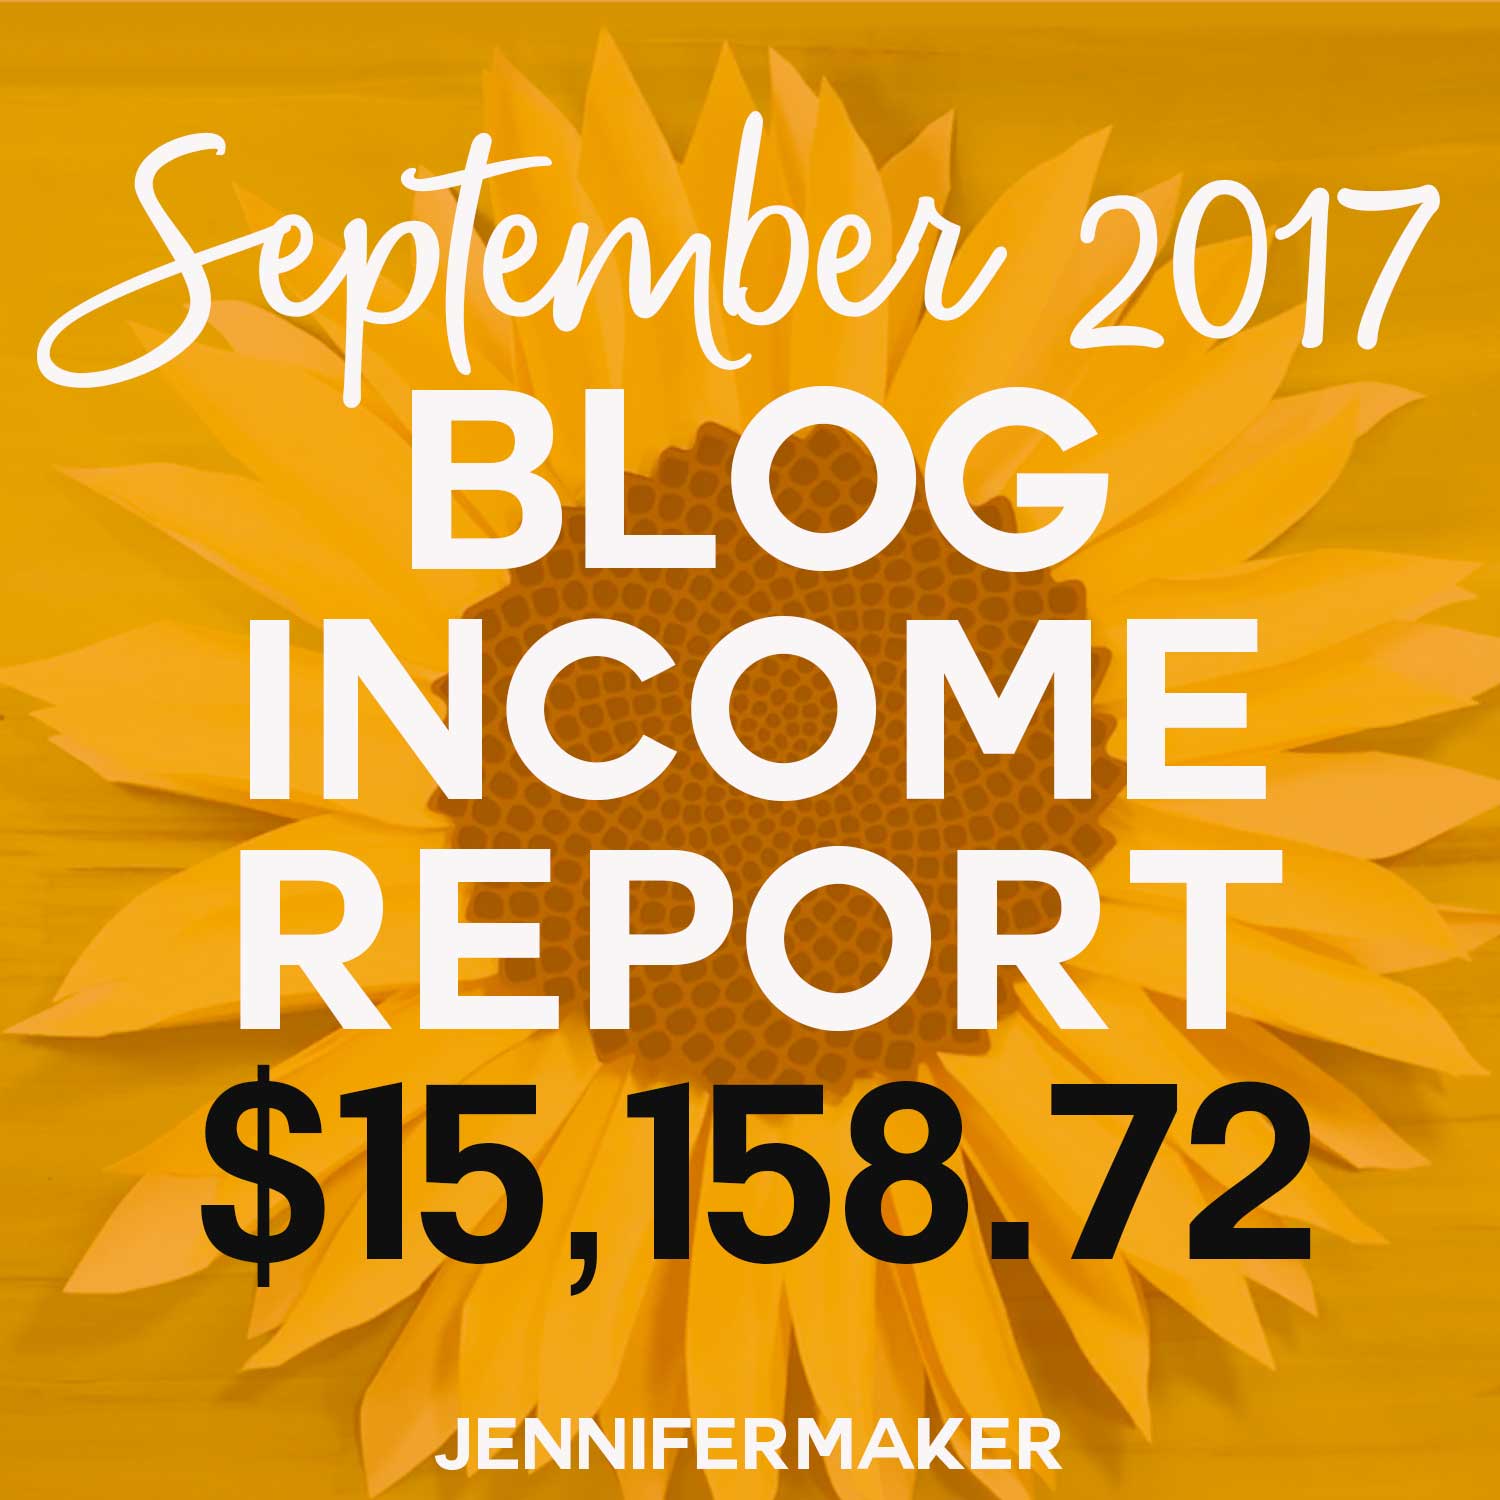 How Do Blogs Make Money: Income Reports Tell The Story of Blogging Revenue (September 2017) #incomereports #blogging